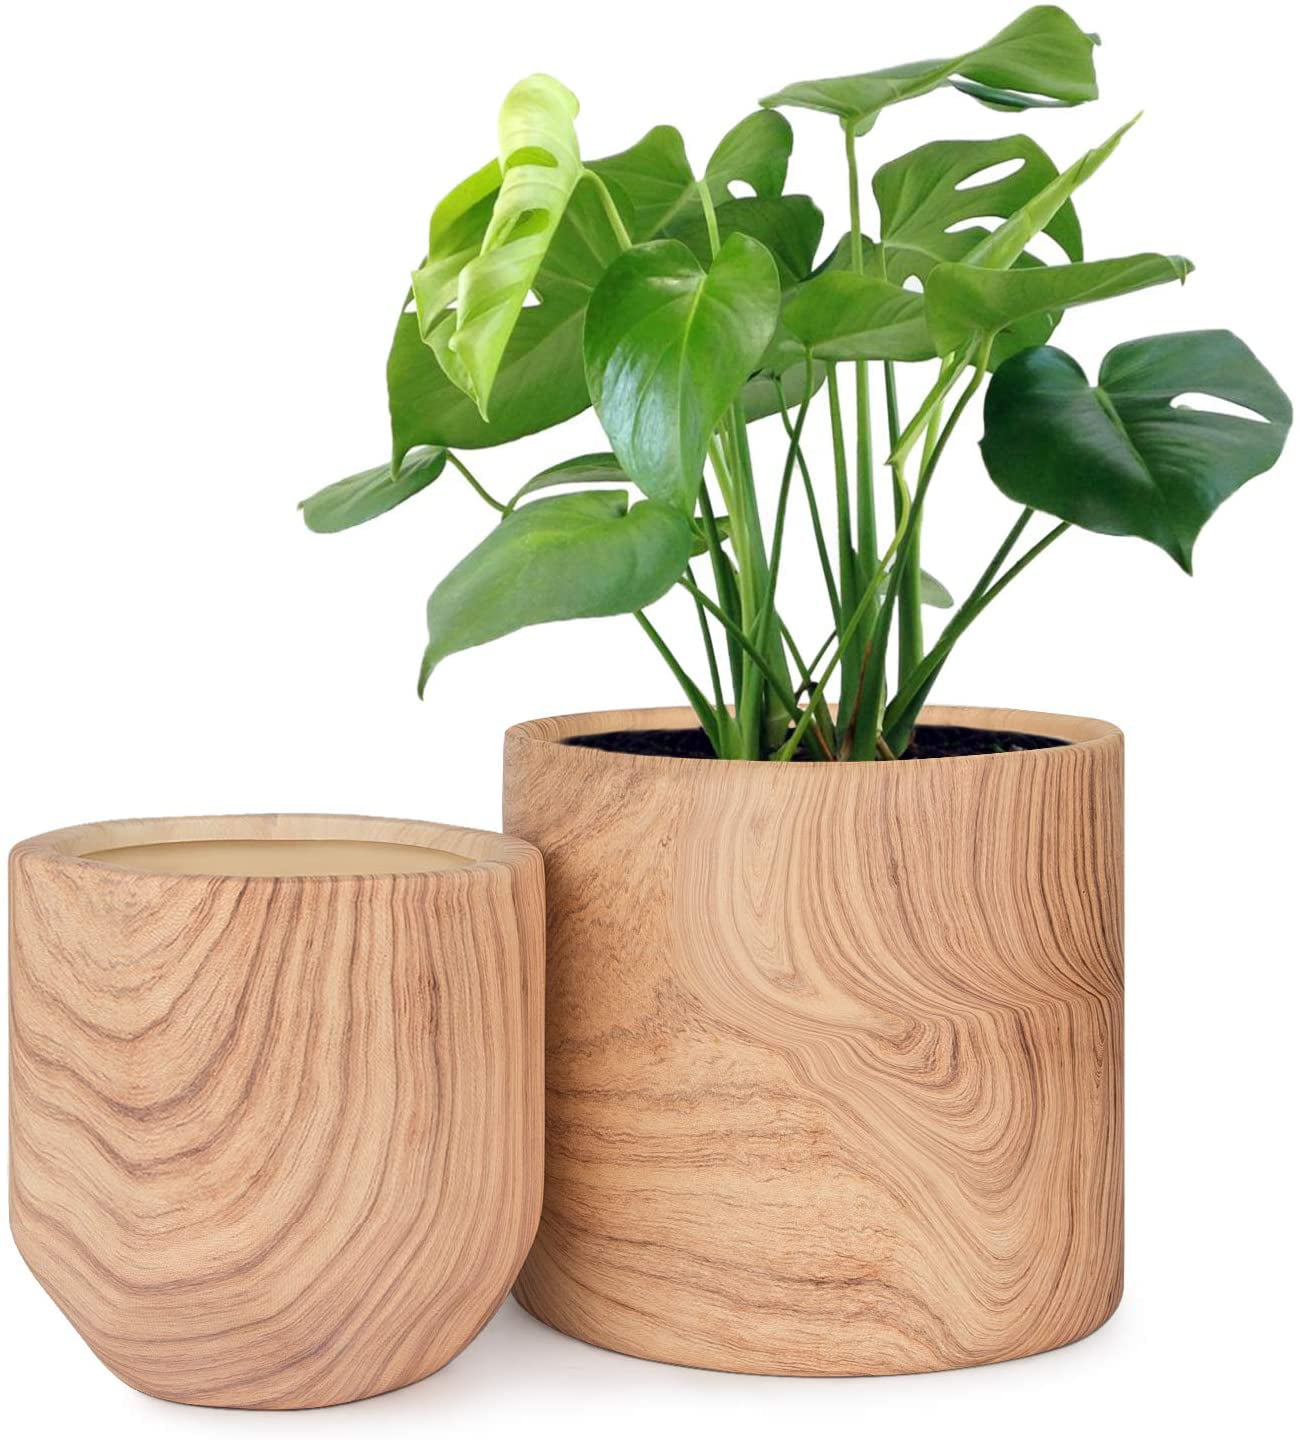 DecorX Plant Pots Indoor 6/4.8 inch Pack 2, Ceramic Planter Flower Pots with Natural Wood